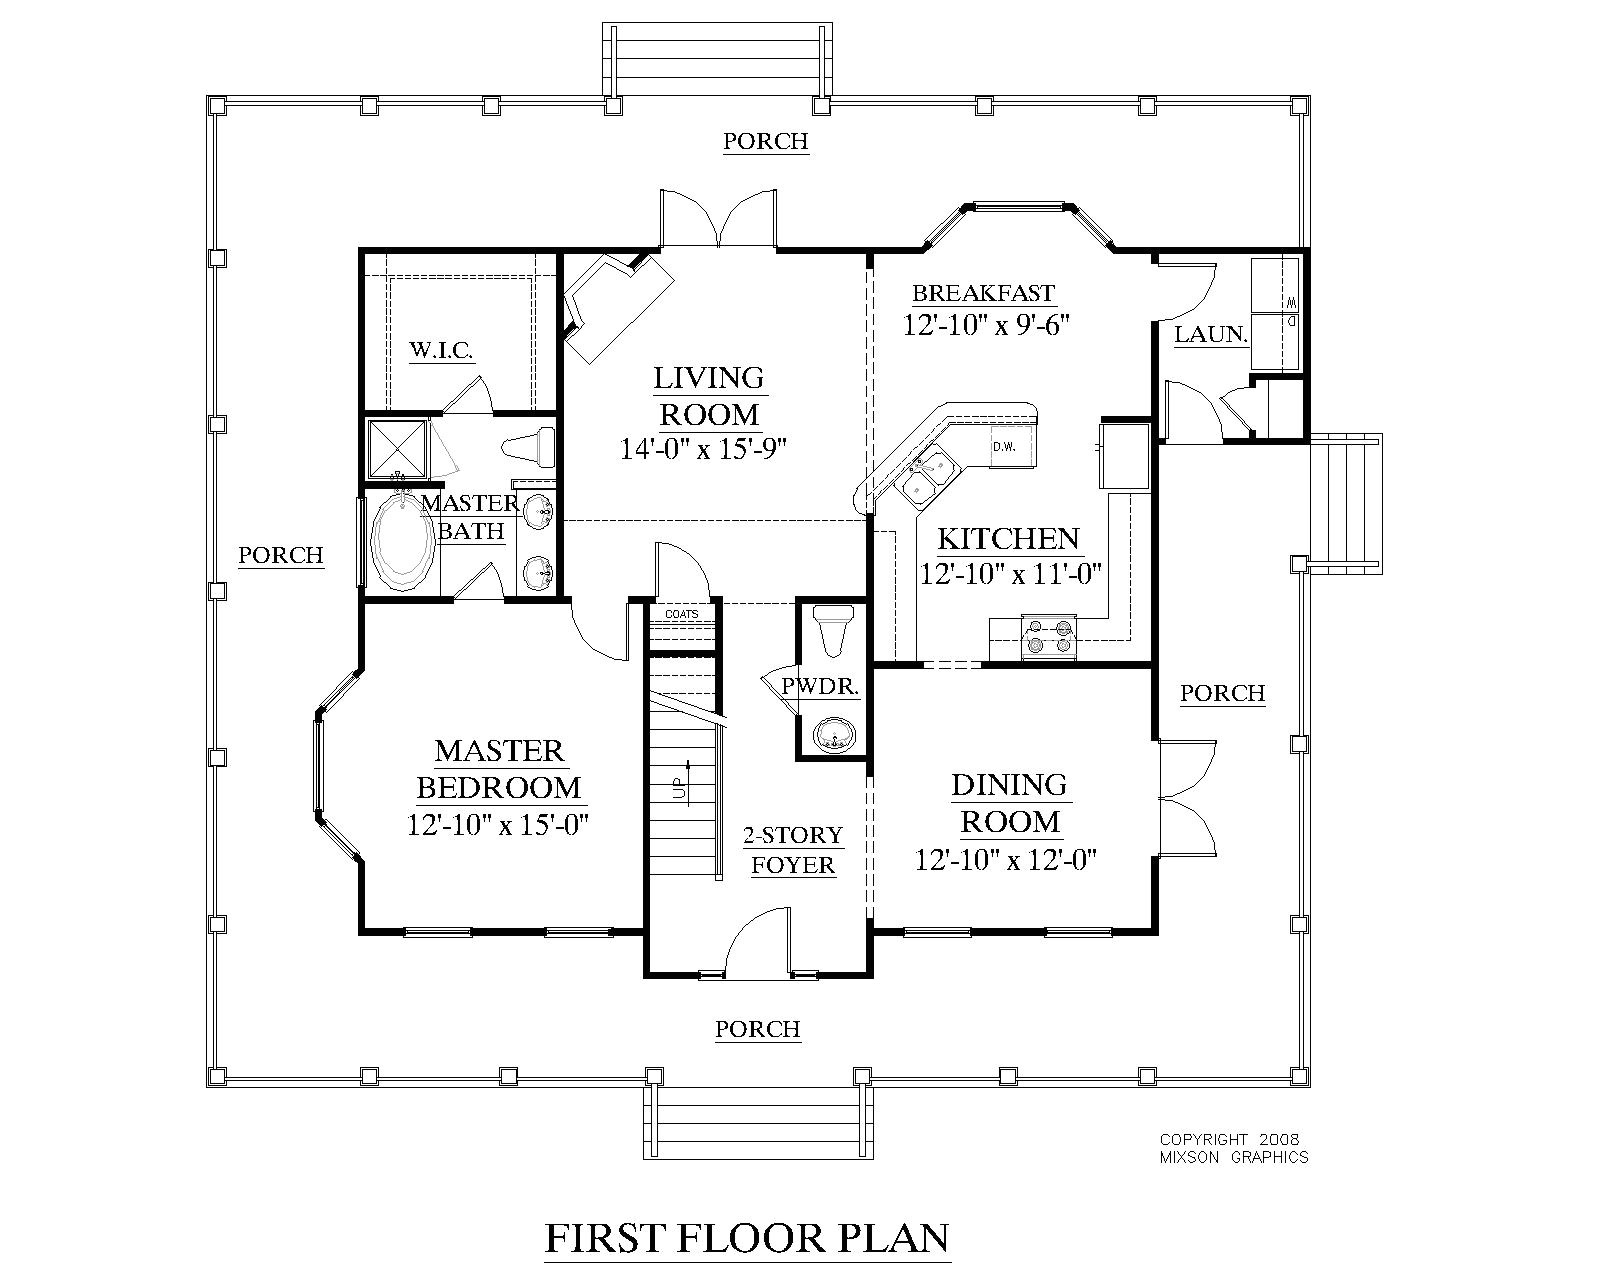 Crawl Space House Plans top 18 Photos Ideas for Crawl Space House Plans Home